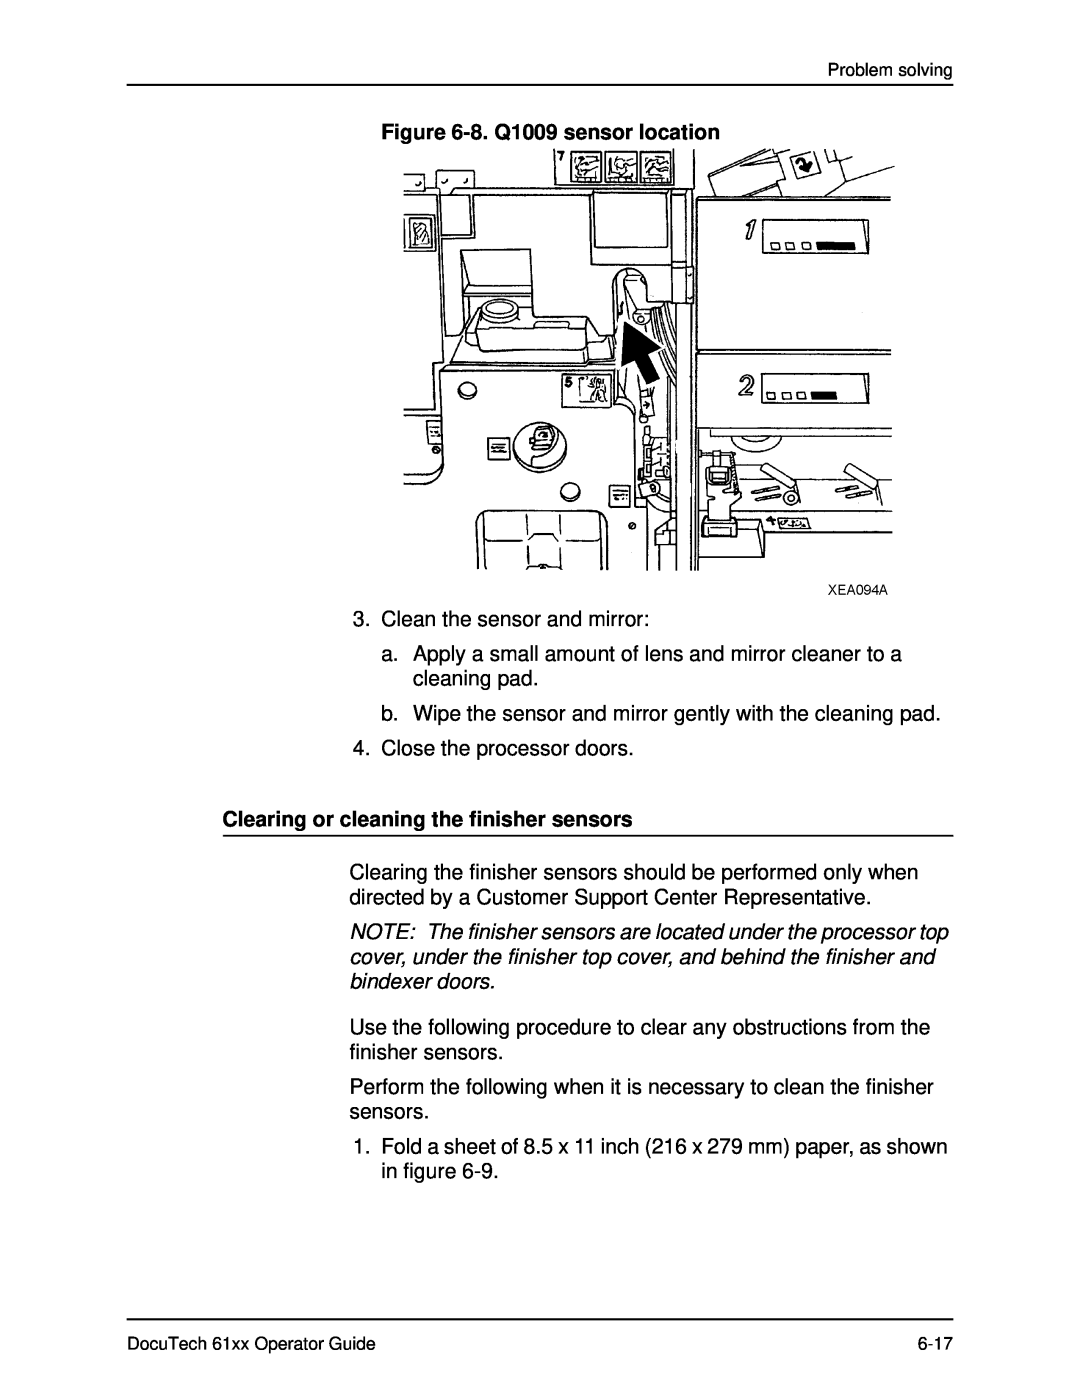 Xerox 61xx manual 8. Q1009 sensor location, Clearing or cleaning the finisher sensors 